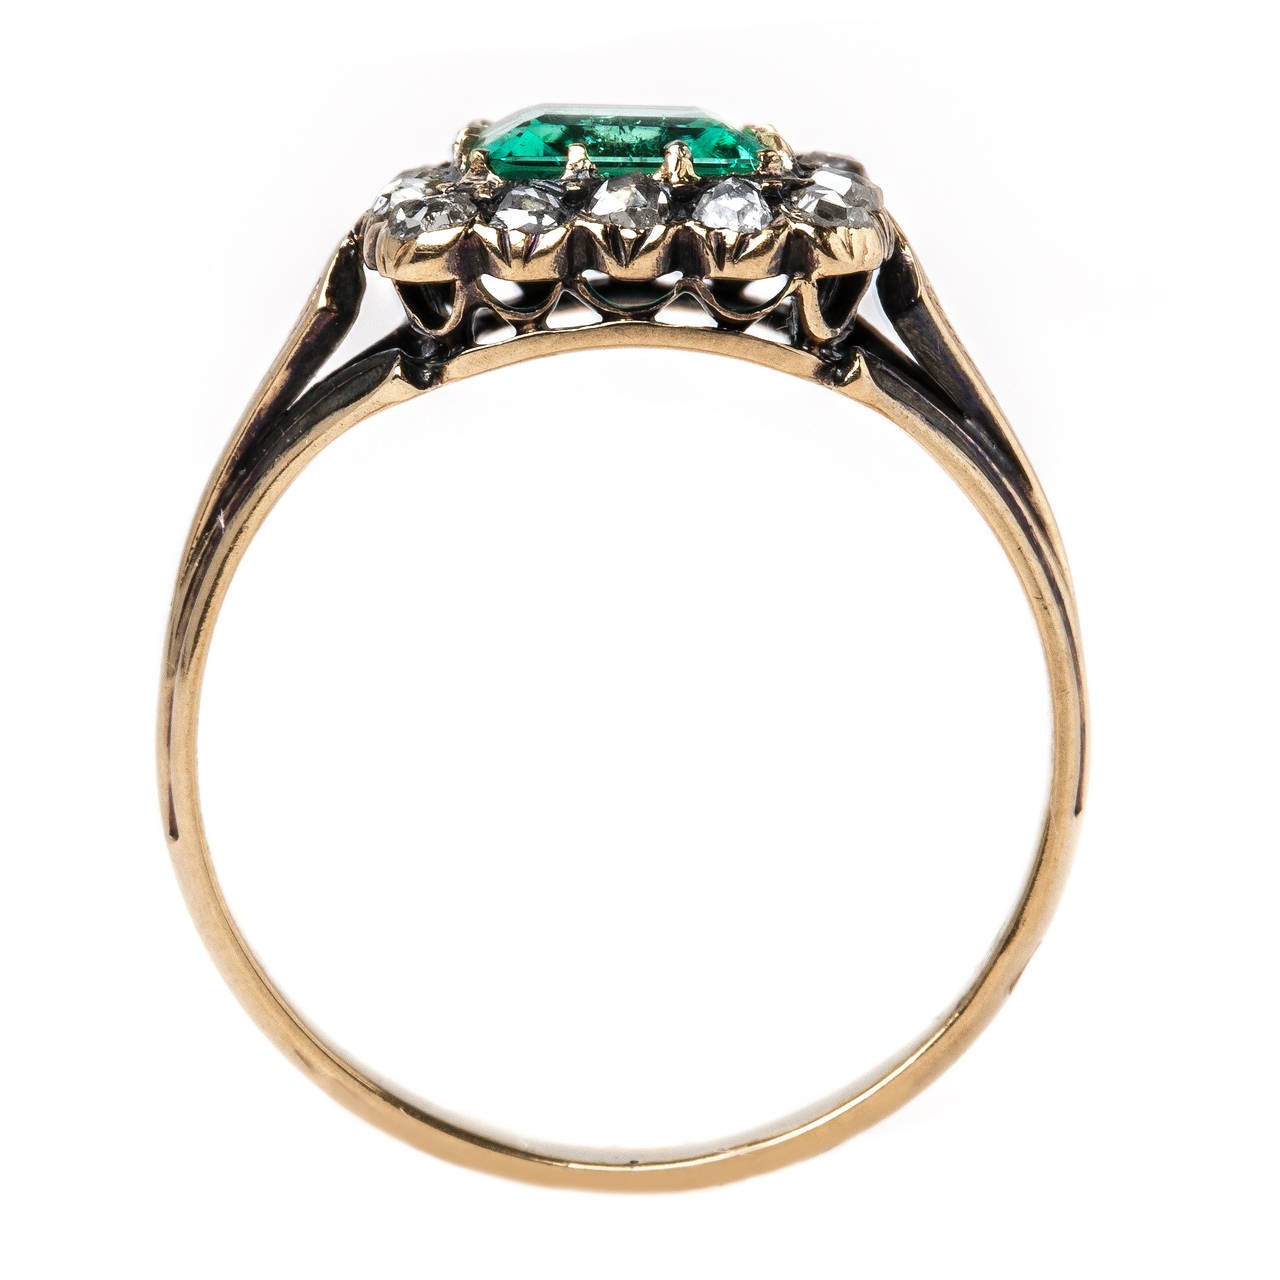 Women's Fabulous Victorian Ring with Emerald Center, Diamond and French Hallmarks